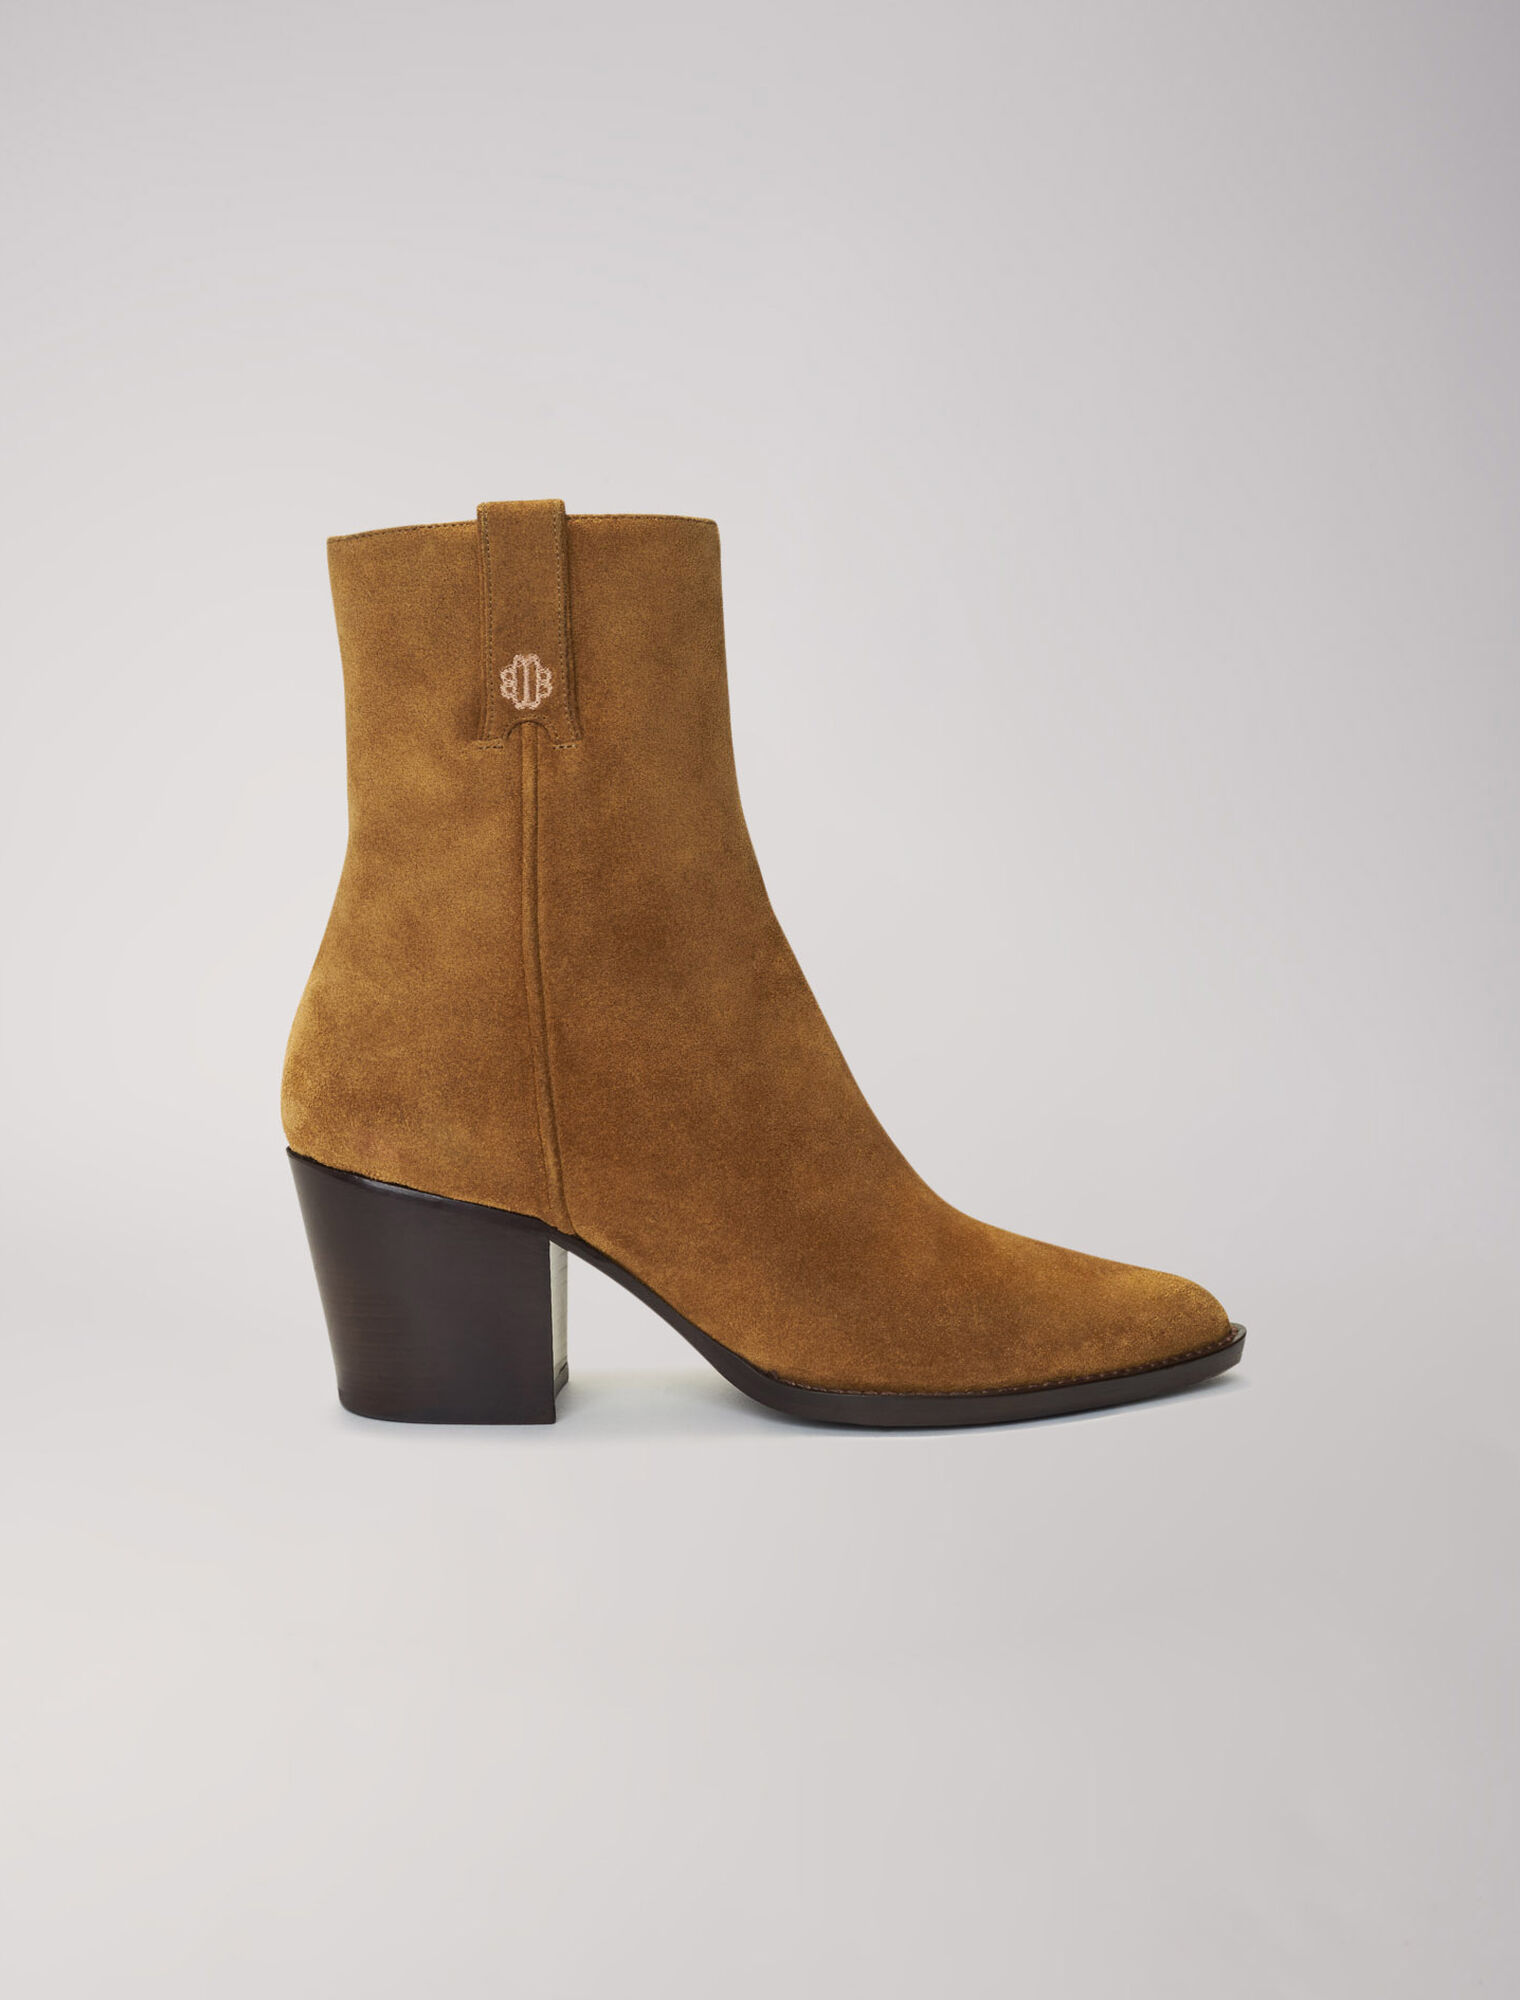 Cowboy boots in camel suede leather